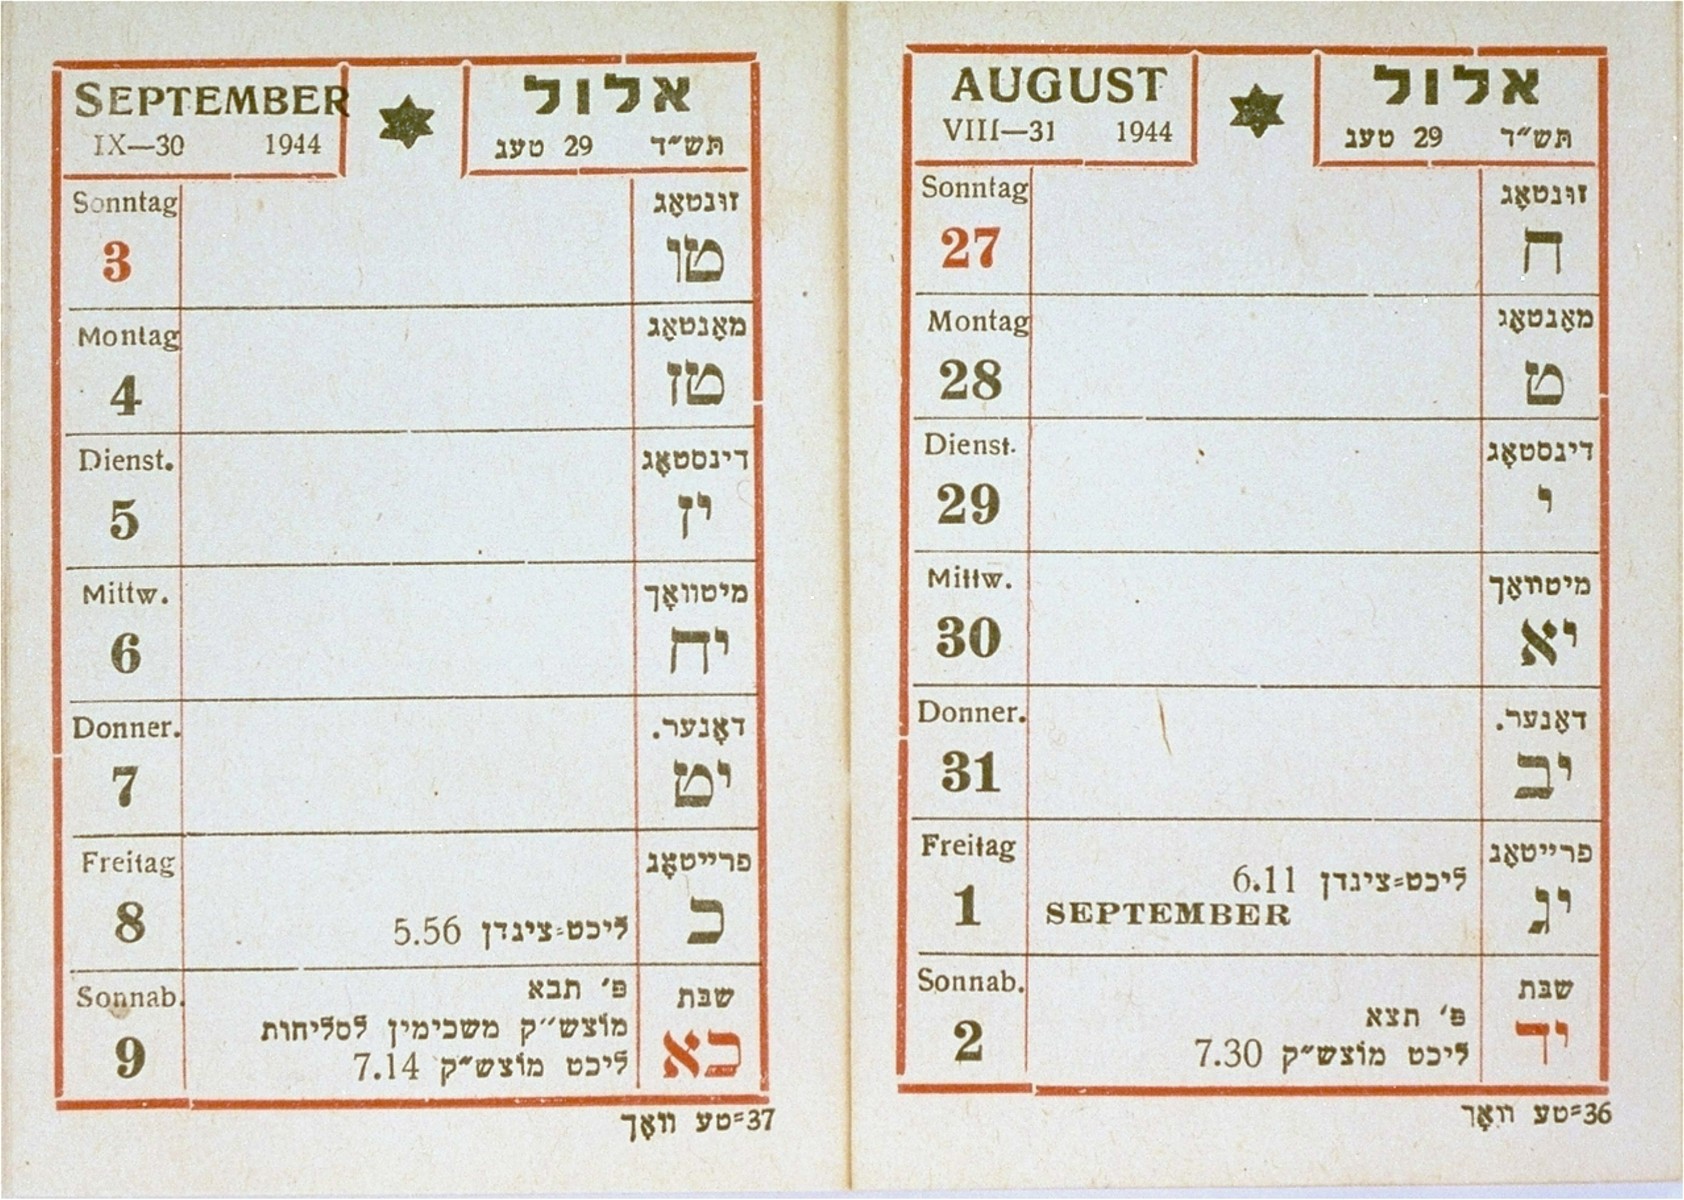 A page from a pocket calendar for the year 1944, printed in the Lodz ghetto.  The calendar was owned by Bernard Fuchs, head of the employment office of the Lodz ghetto Jewish Council.